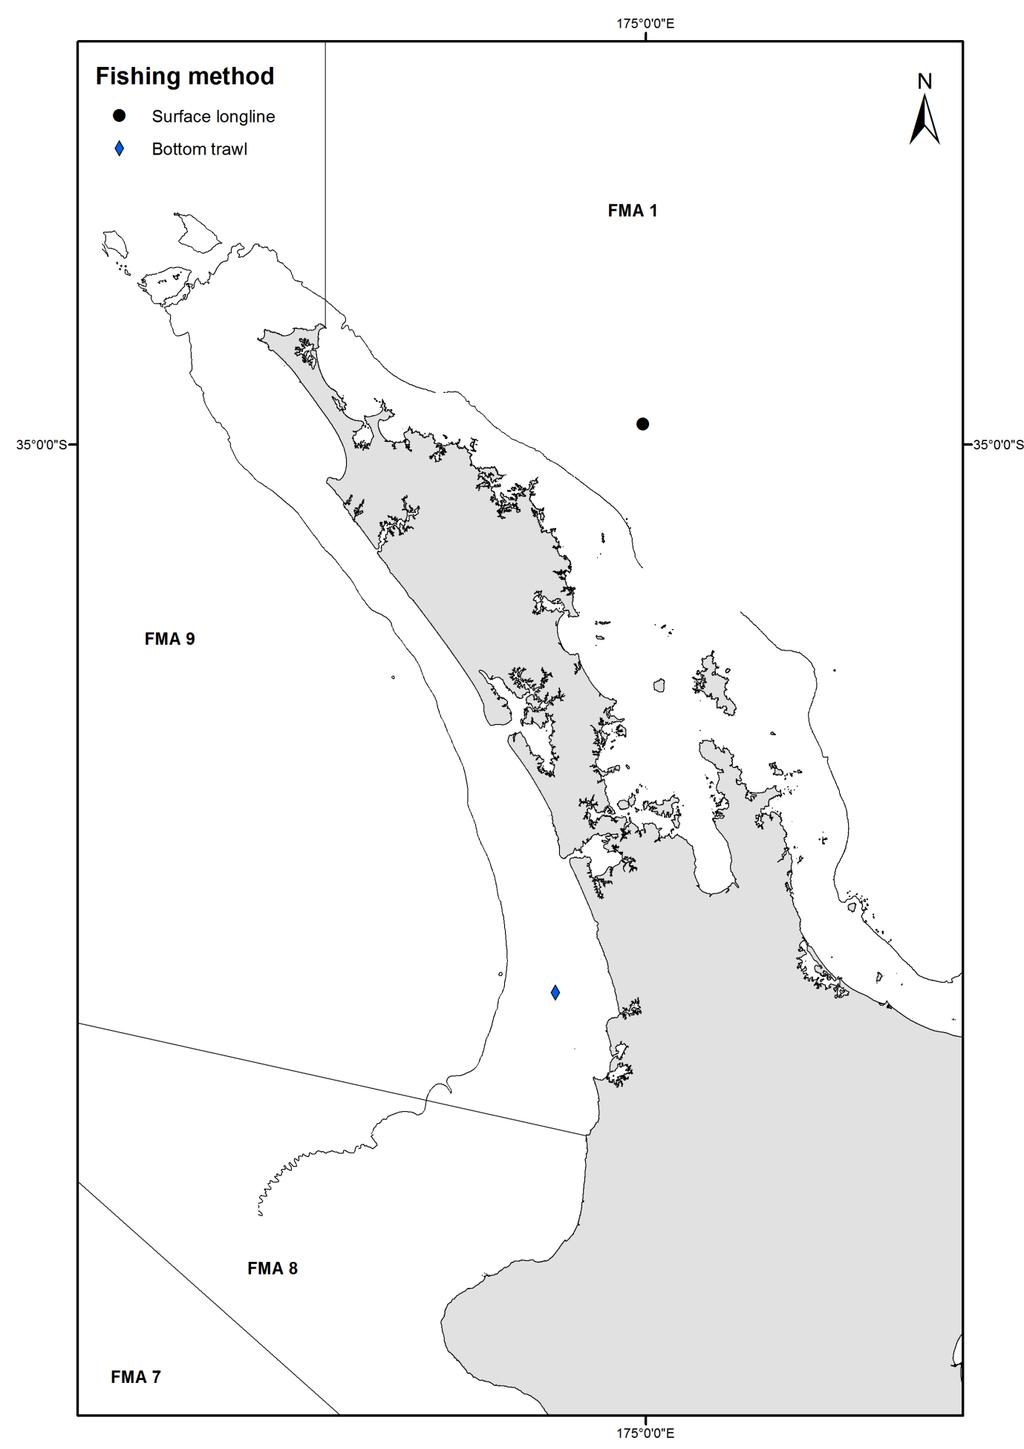 Figure 5. Distribution of reported loggerhead turtle bycatch from 1 July 2008 to 30 November 2015 (n = 2).